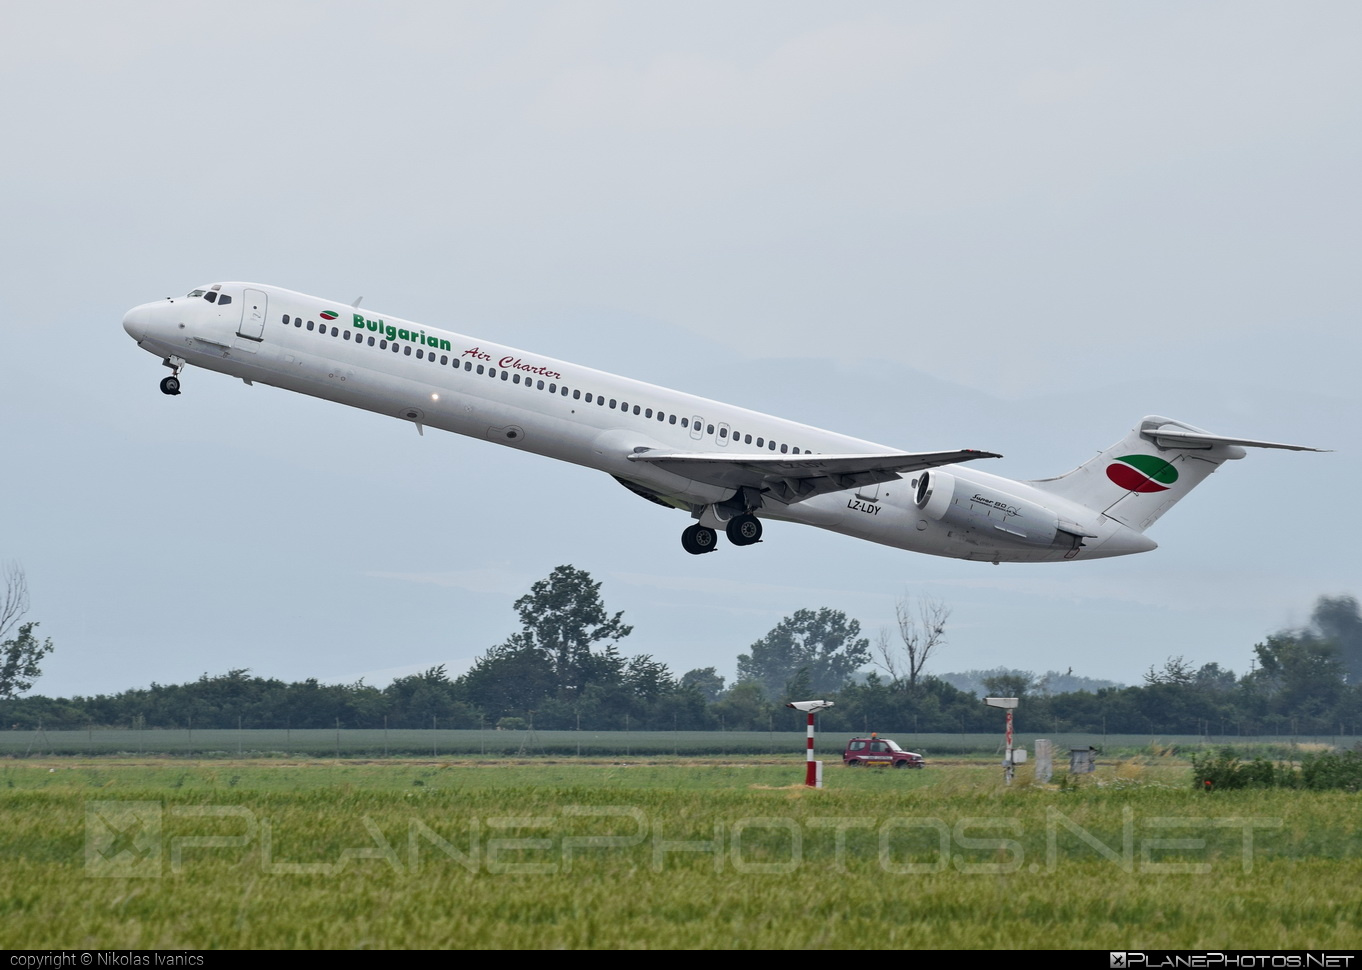 McDonnell Douglas MD-82 - LZ-LDY operated by Bulgarian Air Charter #bulgarianaircharter #mcDonnellDouglas #mcdonnelldouglas80 #mcdonnelldouglas82 #mcdonnelldouglasmd80 #mcdonnelldouglasmd82 #md80 #md82